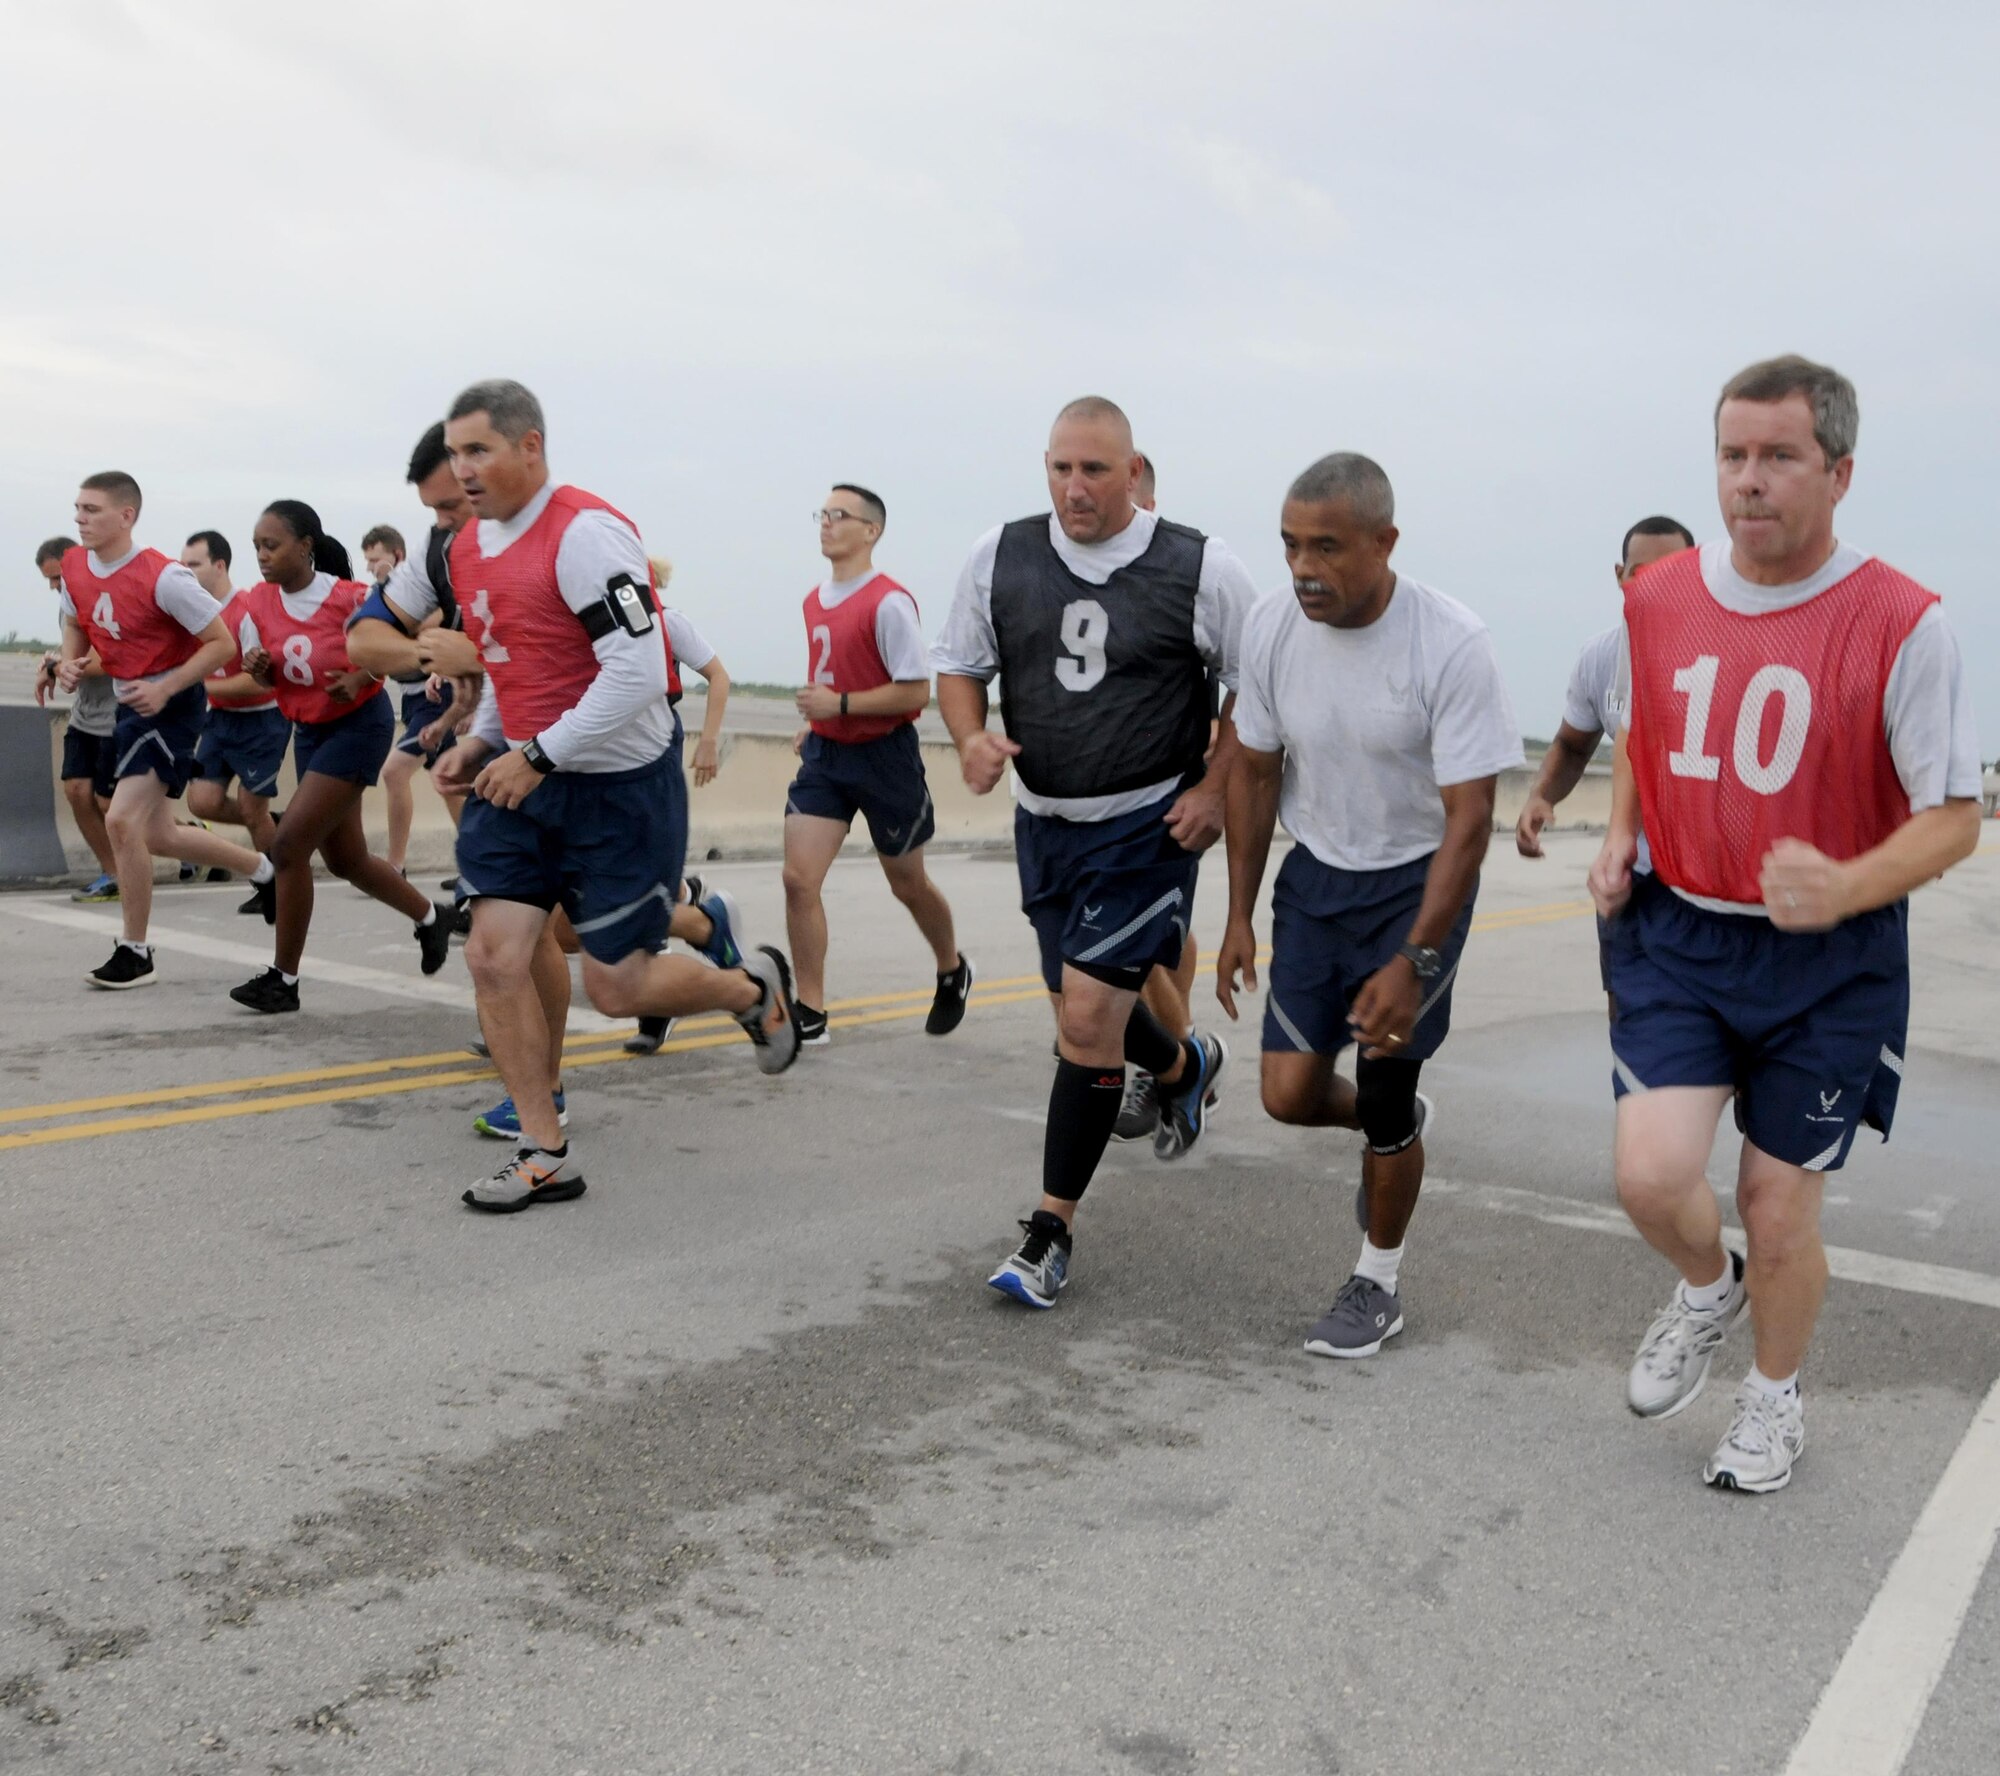 Chief Master Sgt. Mateo, 482nd Civil Engineering Squadron chief enlisted manager, right, motivates Master Sgt. Keith Armour, 482nd CES engineering superintendent, during the run portion of his fitness assessment at Homestead Air Reserve Base, Fla., Aug. 5, 2016. The Air Force Fitness Assessment is a physical performance test used to test endurance and strength of members. (U.S. Air Force photo by Senior Airman Aja Heiden)